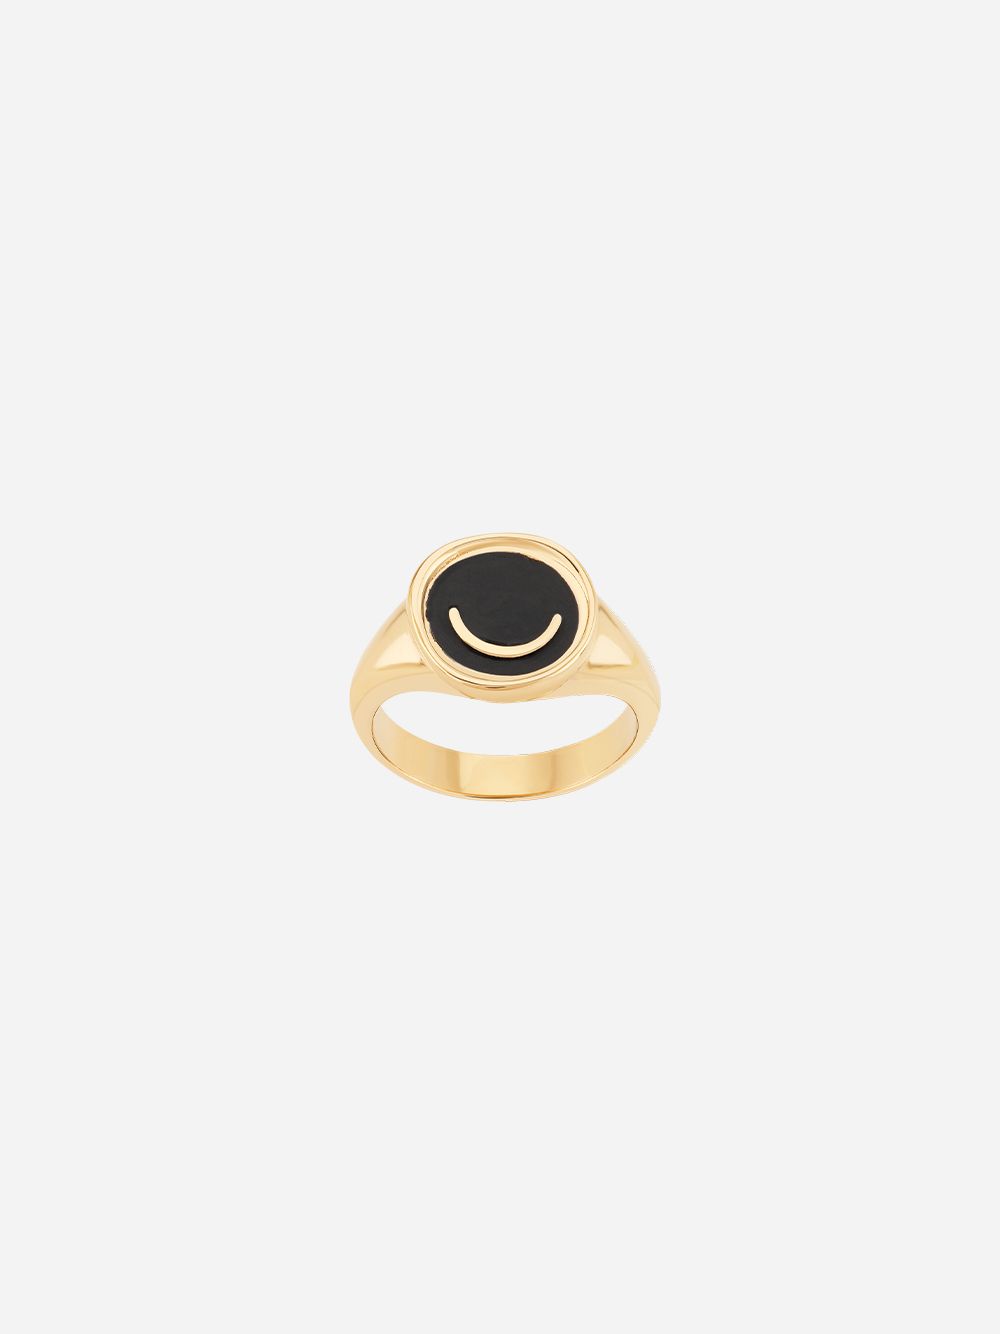 Happiness Ring | Wonther